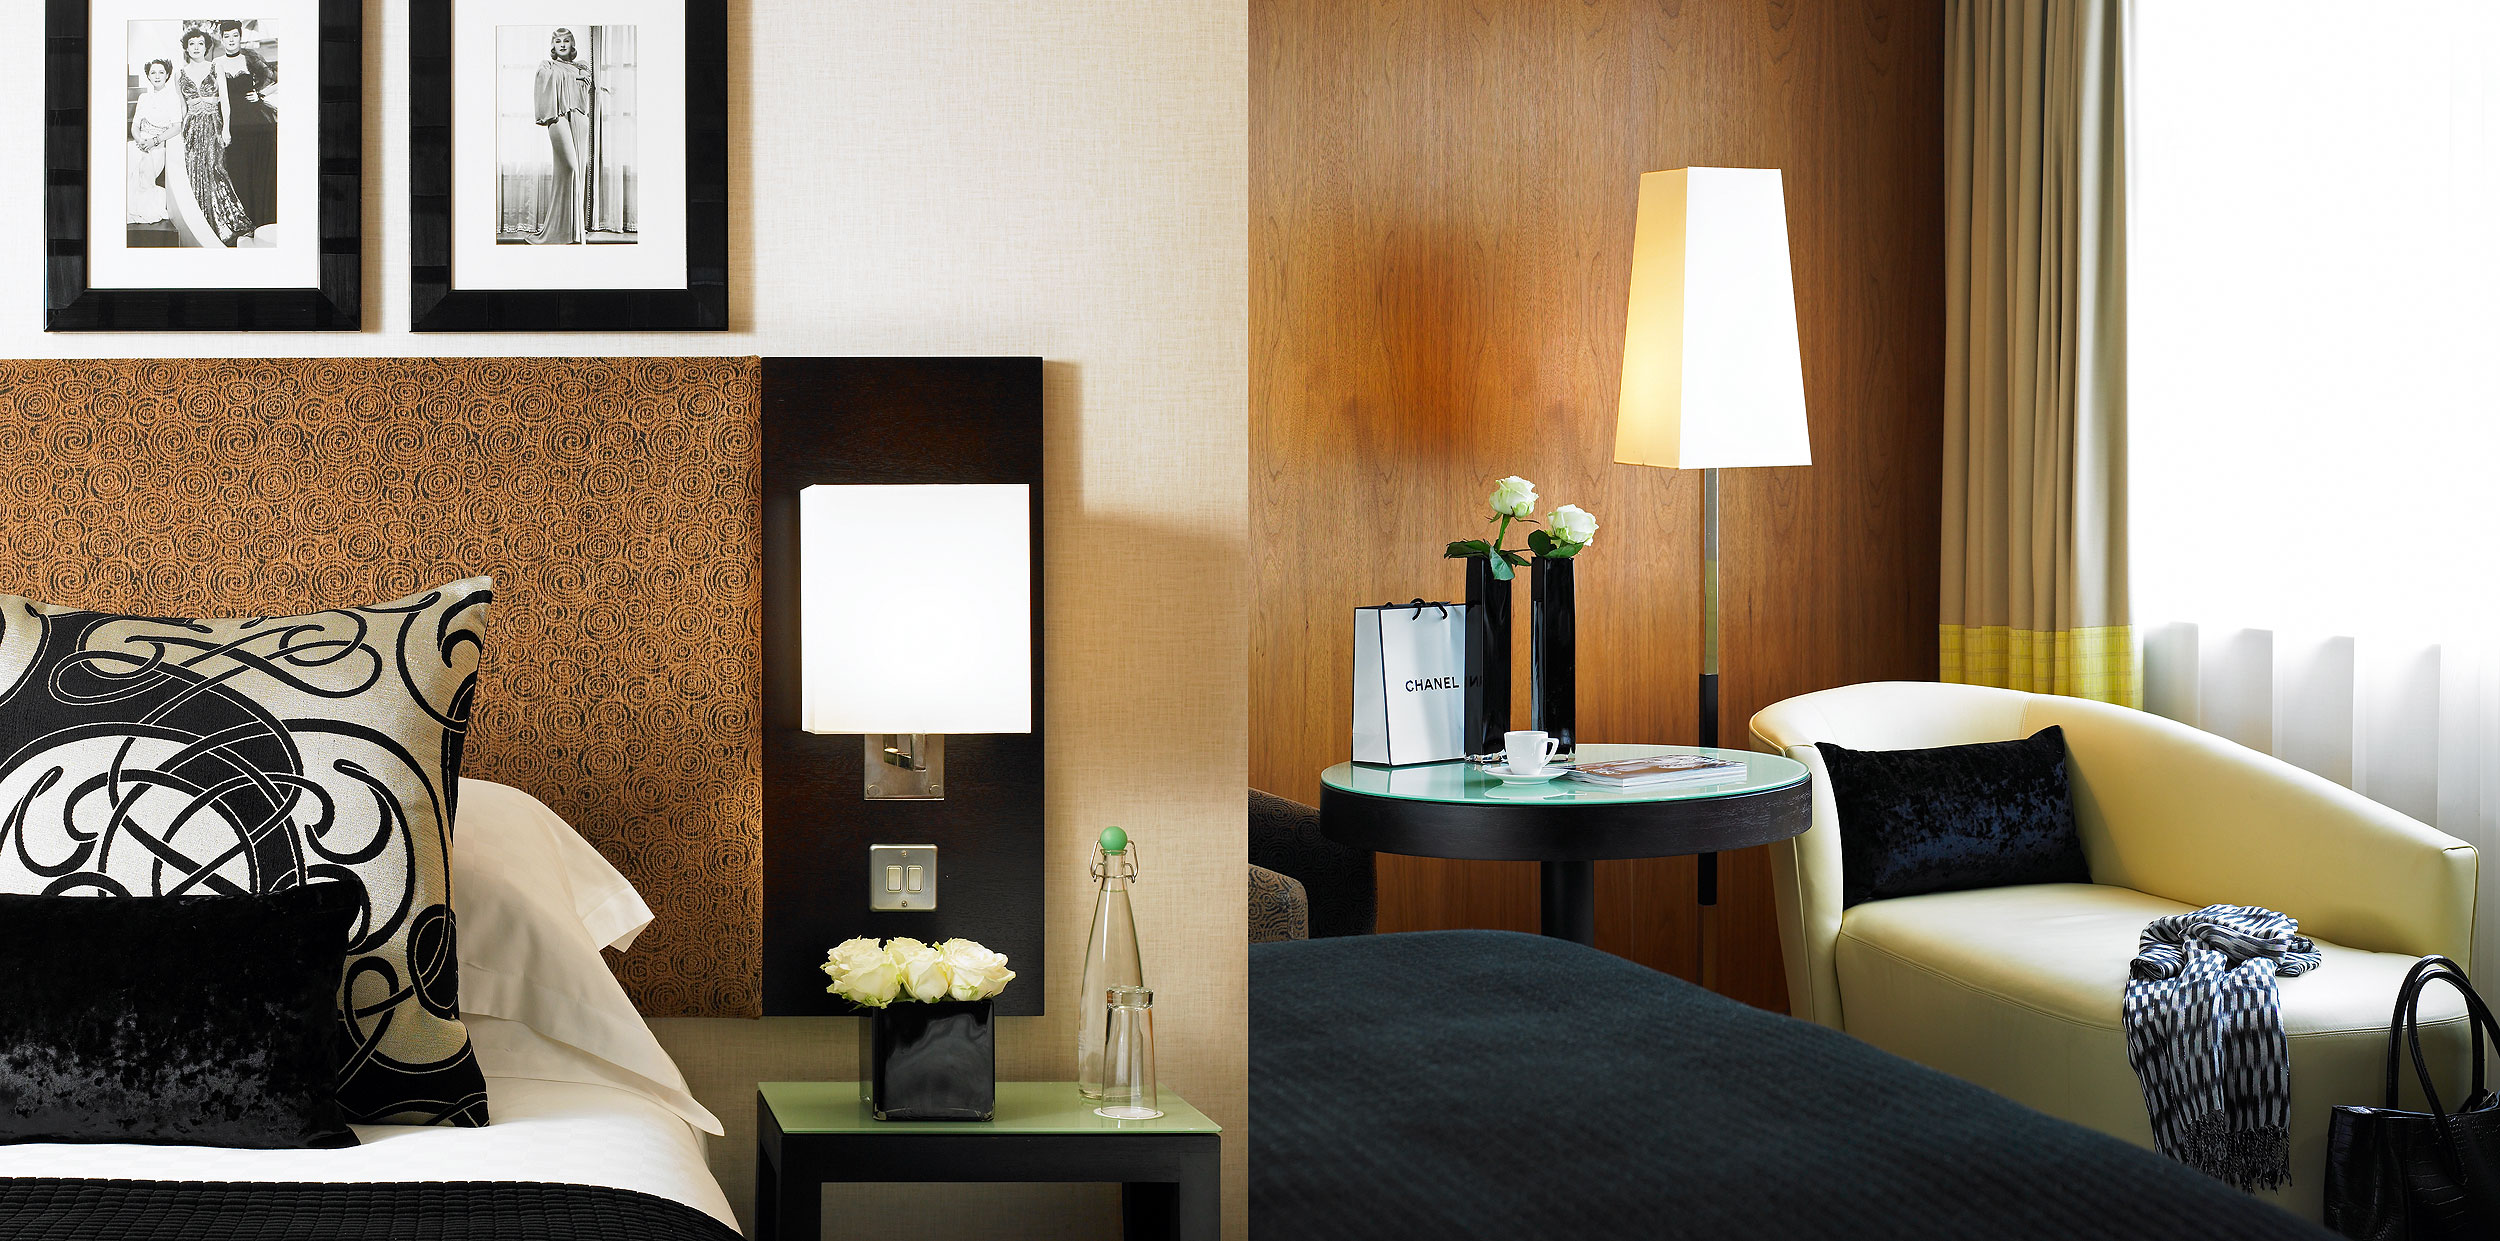 Bedroom details at The Cavendish hotel, London.  Architectural photography by Mike Caldwell 